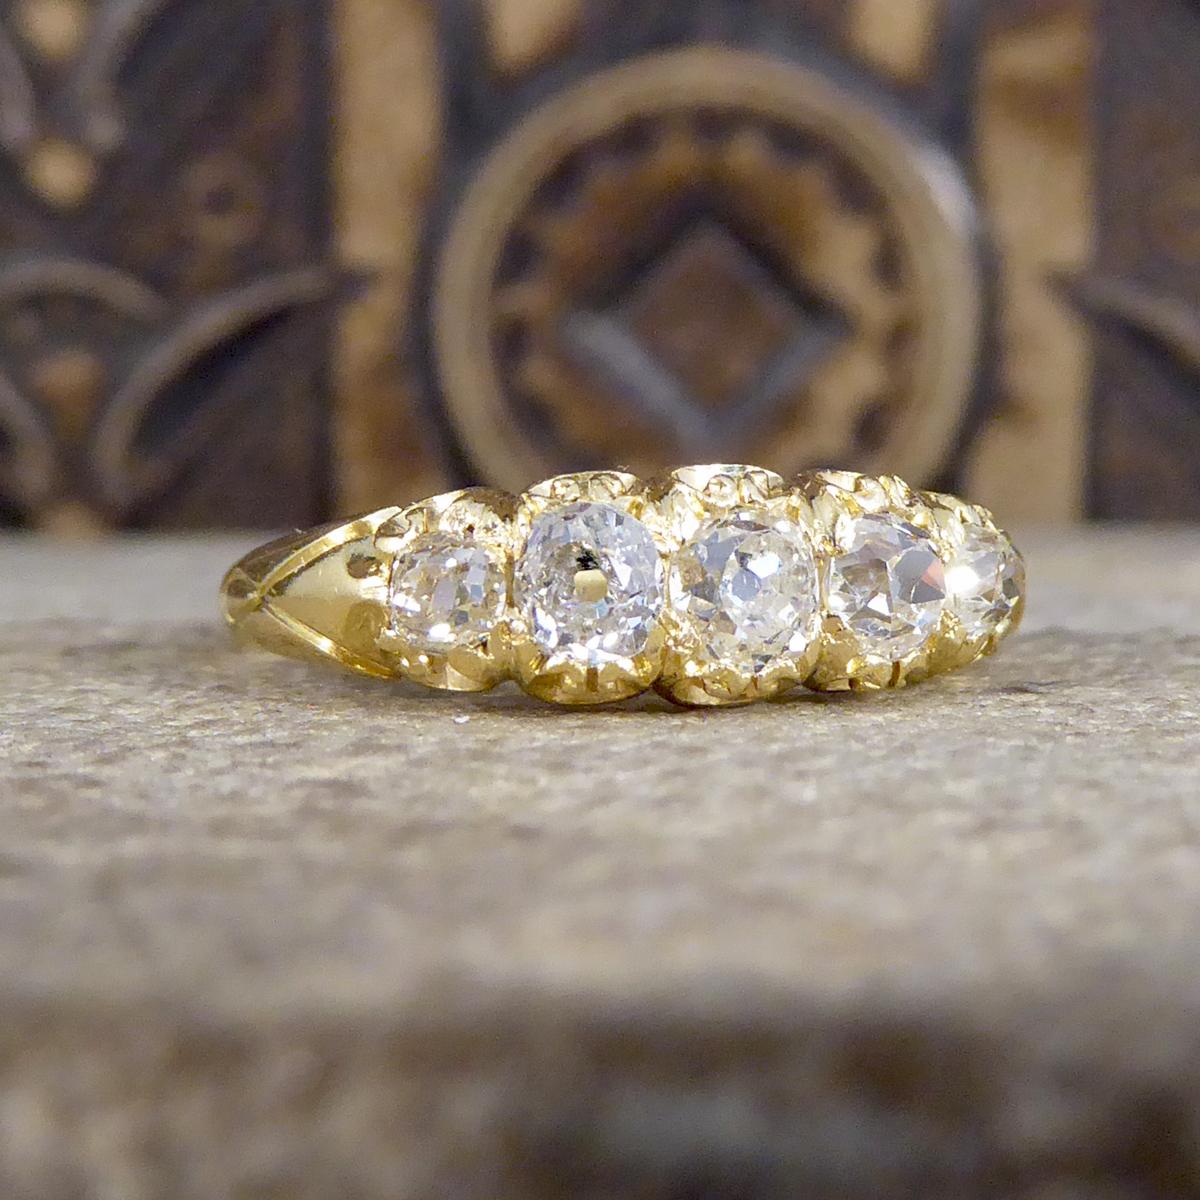 This gorgeous ring features five old cushion cut Diamonds on a wonderfully detailed gallery design. It has been hand crafted in 18ct yellow gold, it was crafted in the Late Victorian era and looks stately on the hand!

Diamond Details:
Cut: Old